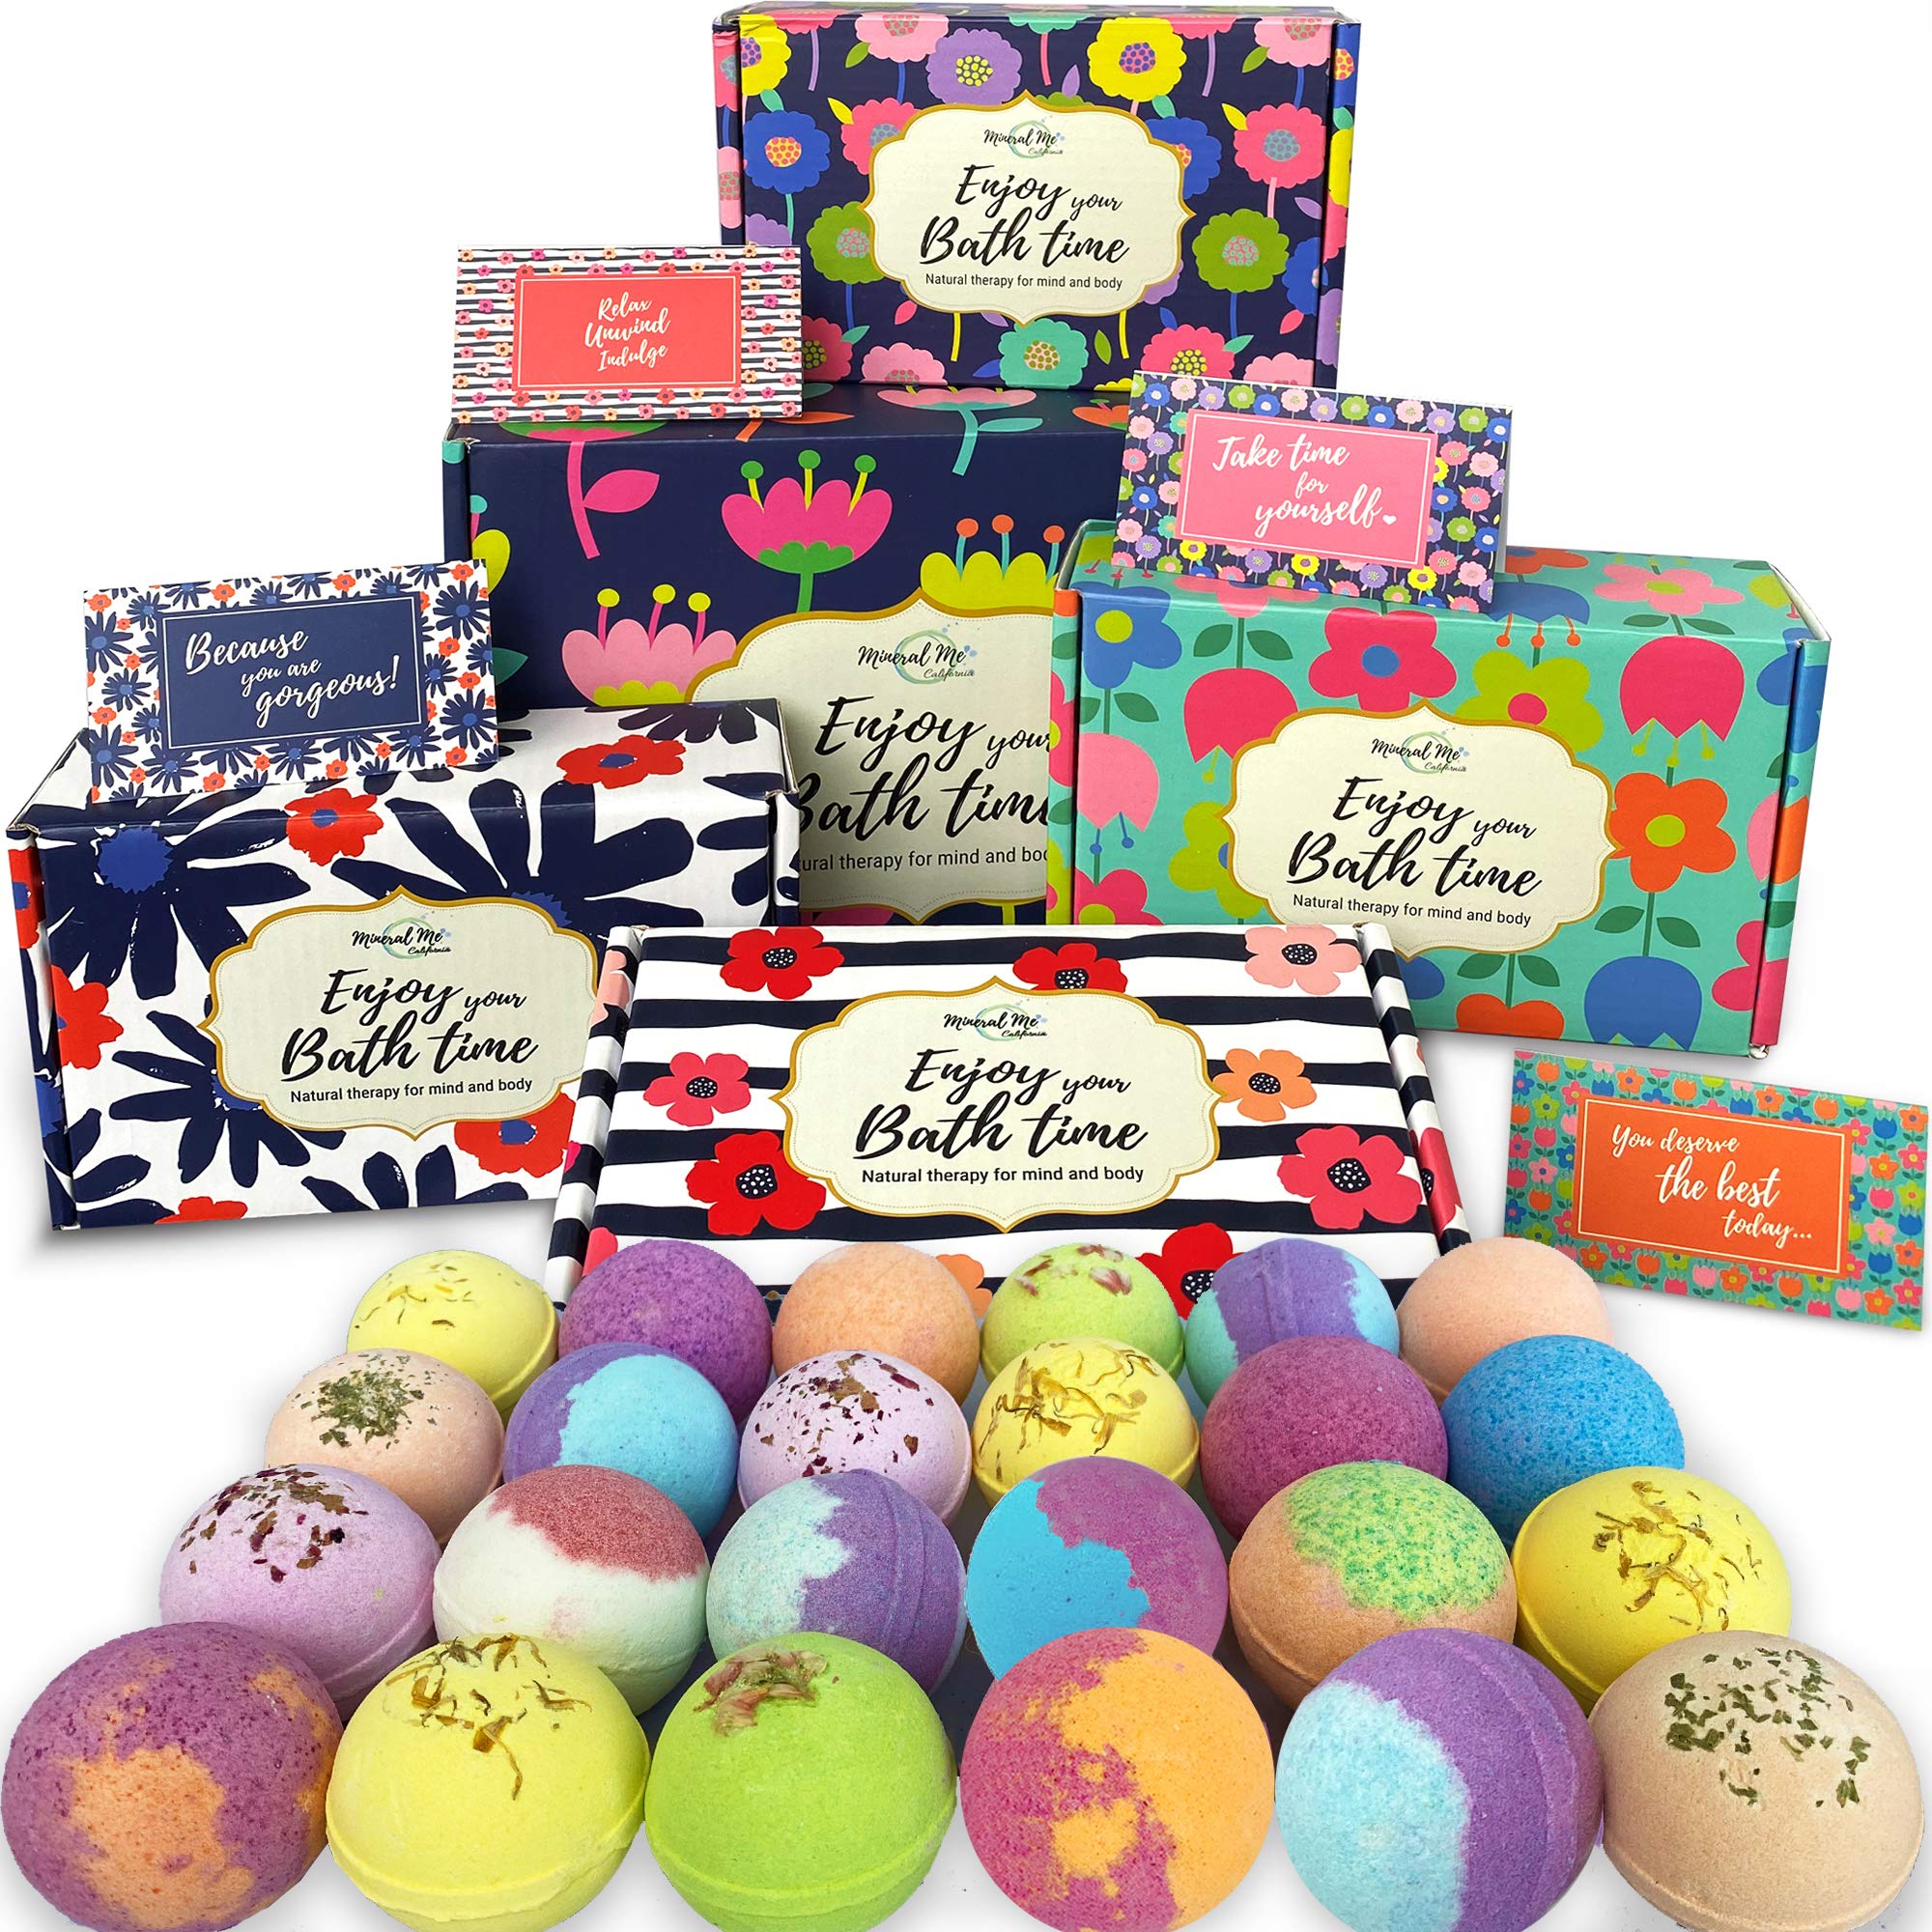 Bath Bombs for Women - 24 Natural and Organic Bath Bombs with Essential Oils and Moisturizing Shea Butter- BathBombs Gift Set for Relaxation and Calmness - Birthday Gift for Mom, Wife, Her